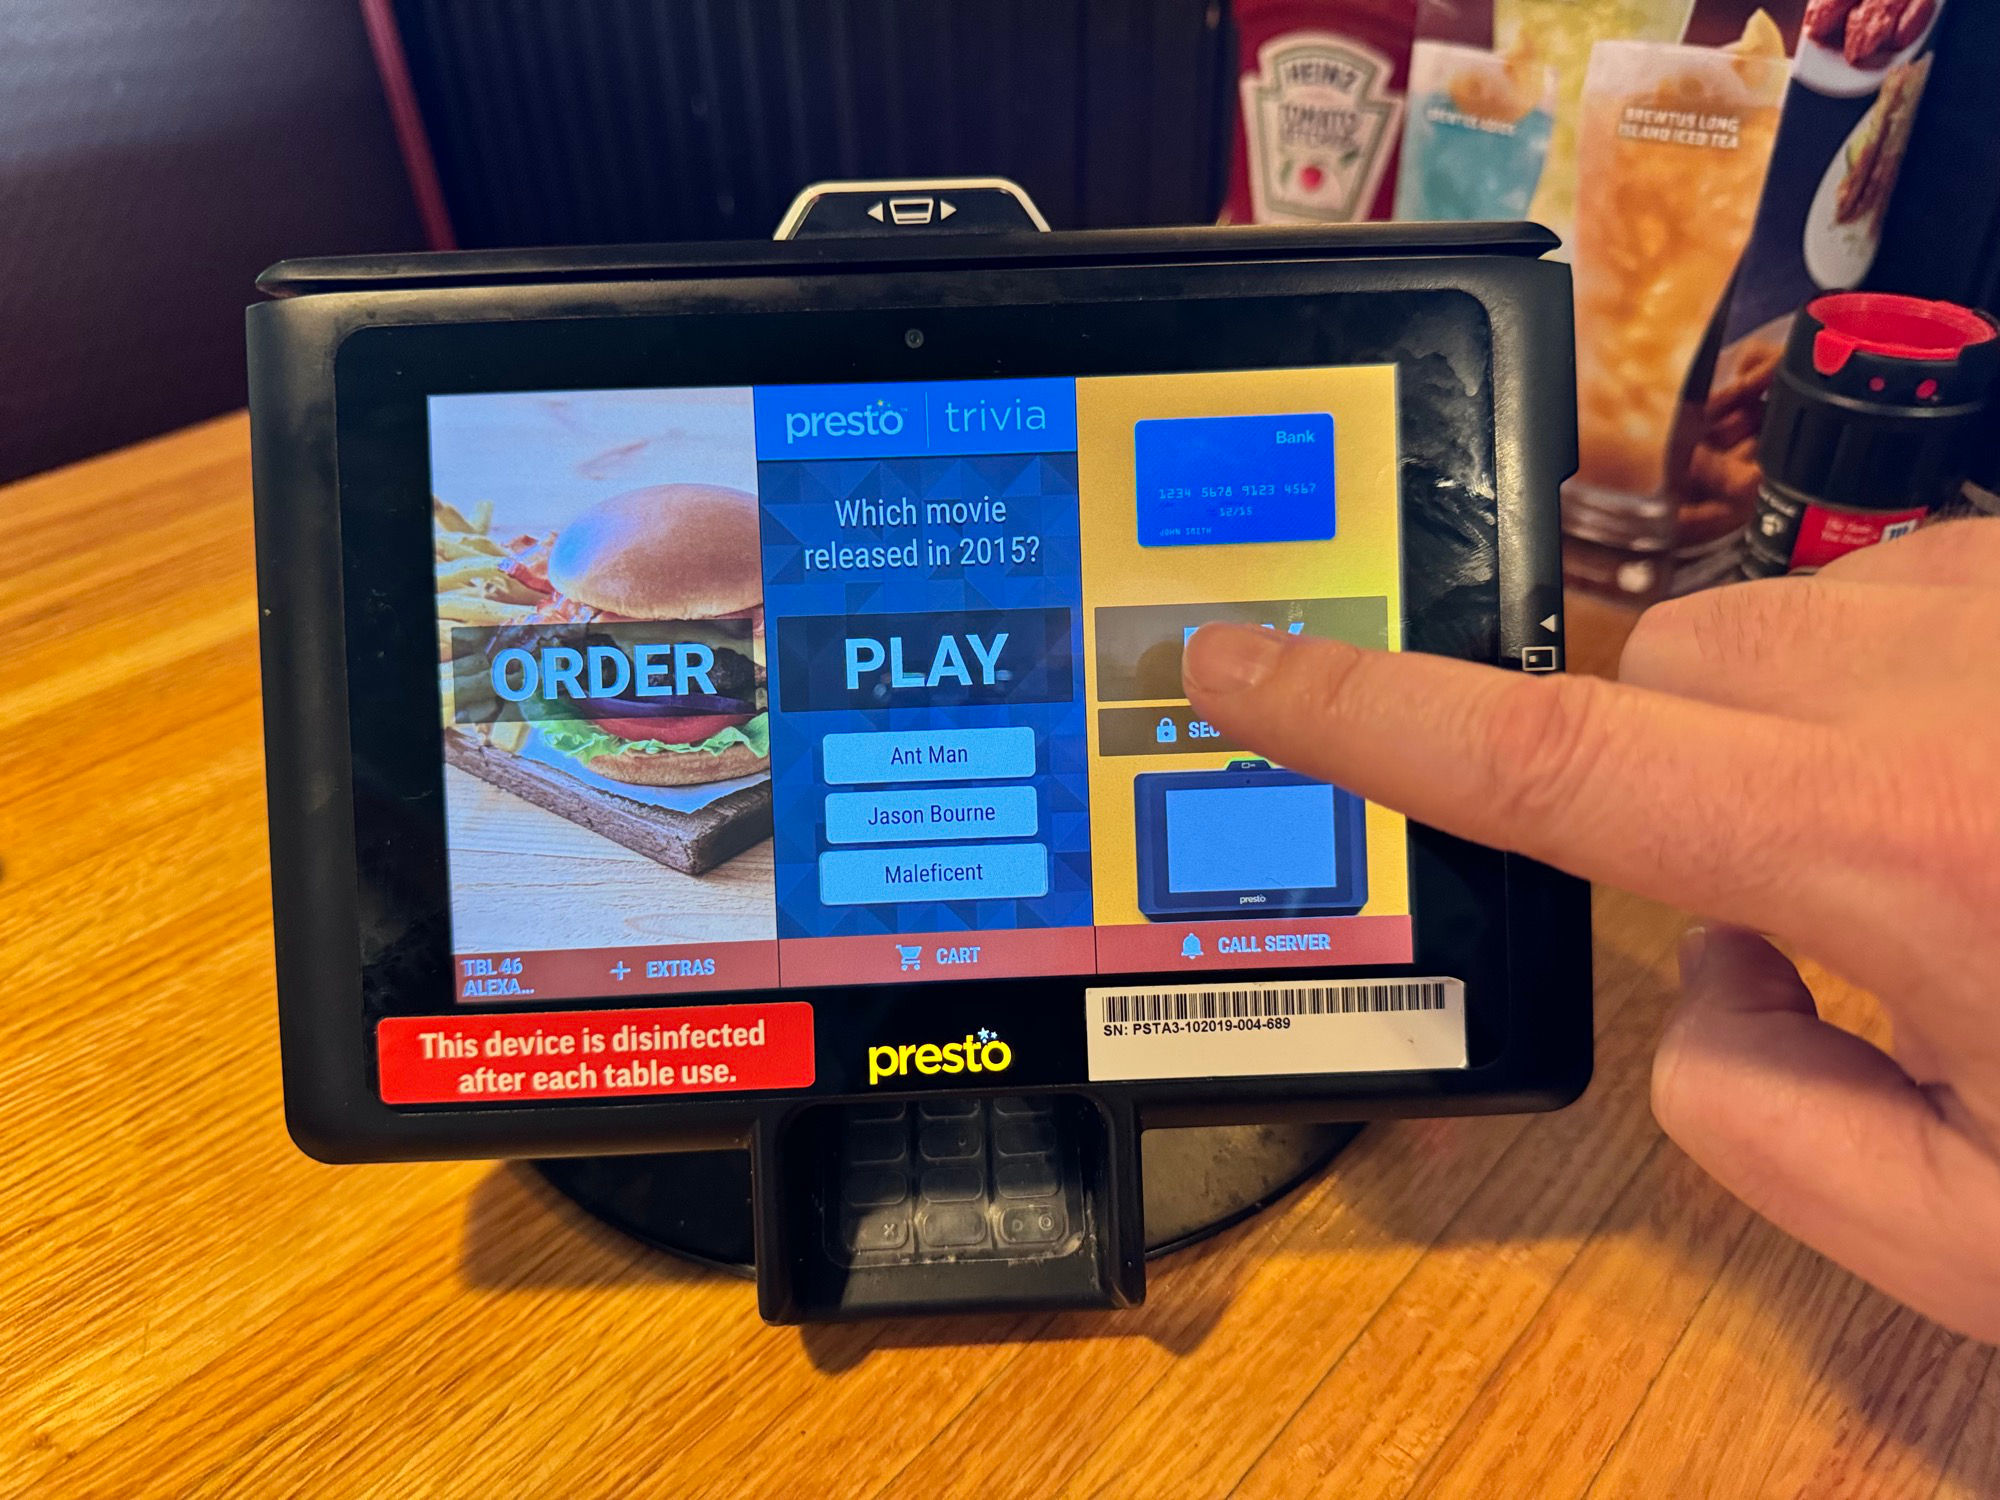 Applebee's Pay at the Table